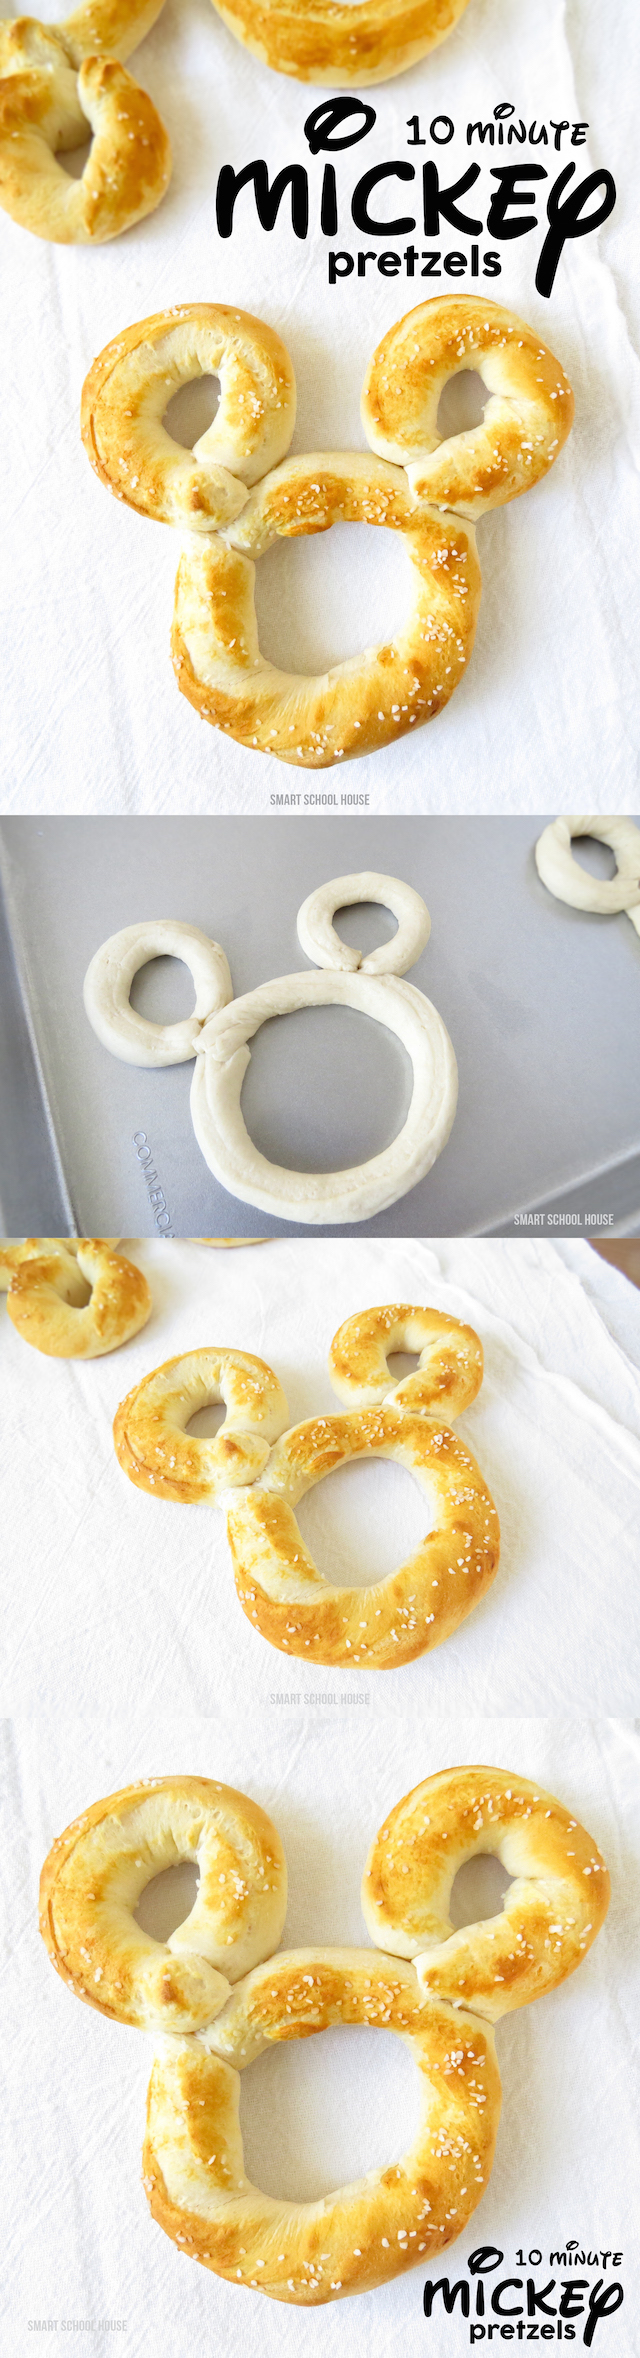 Mickey Pretzels - They only take 10 minutes to make!